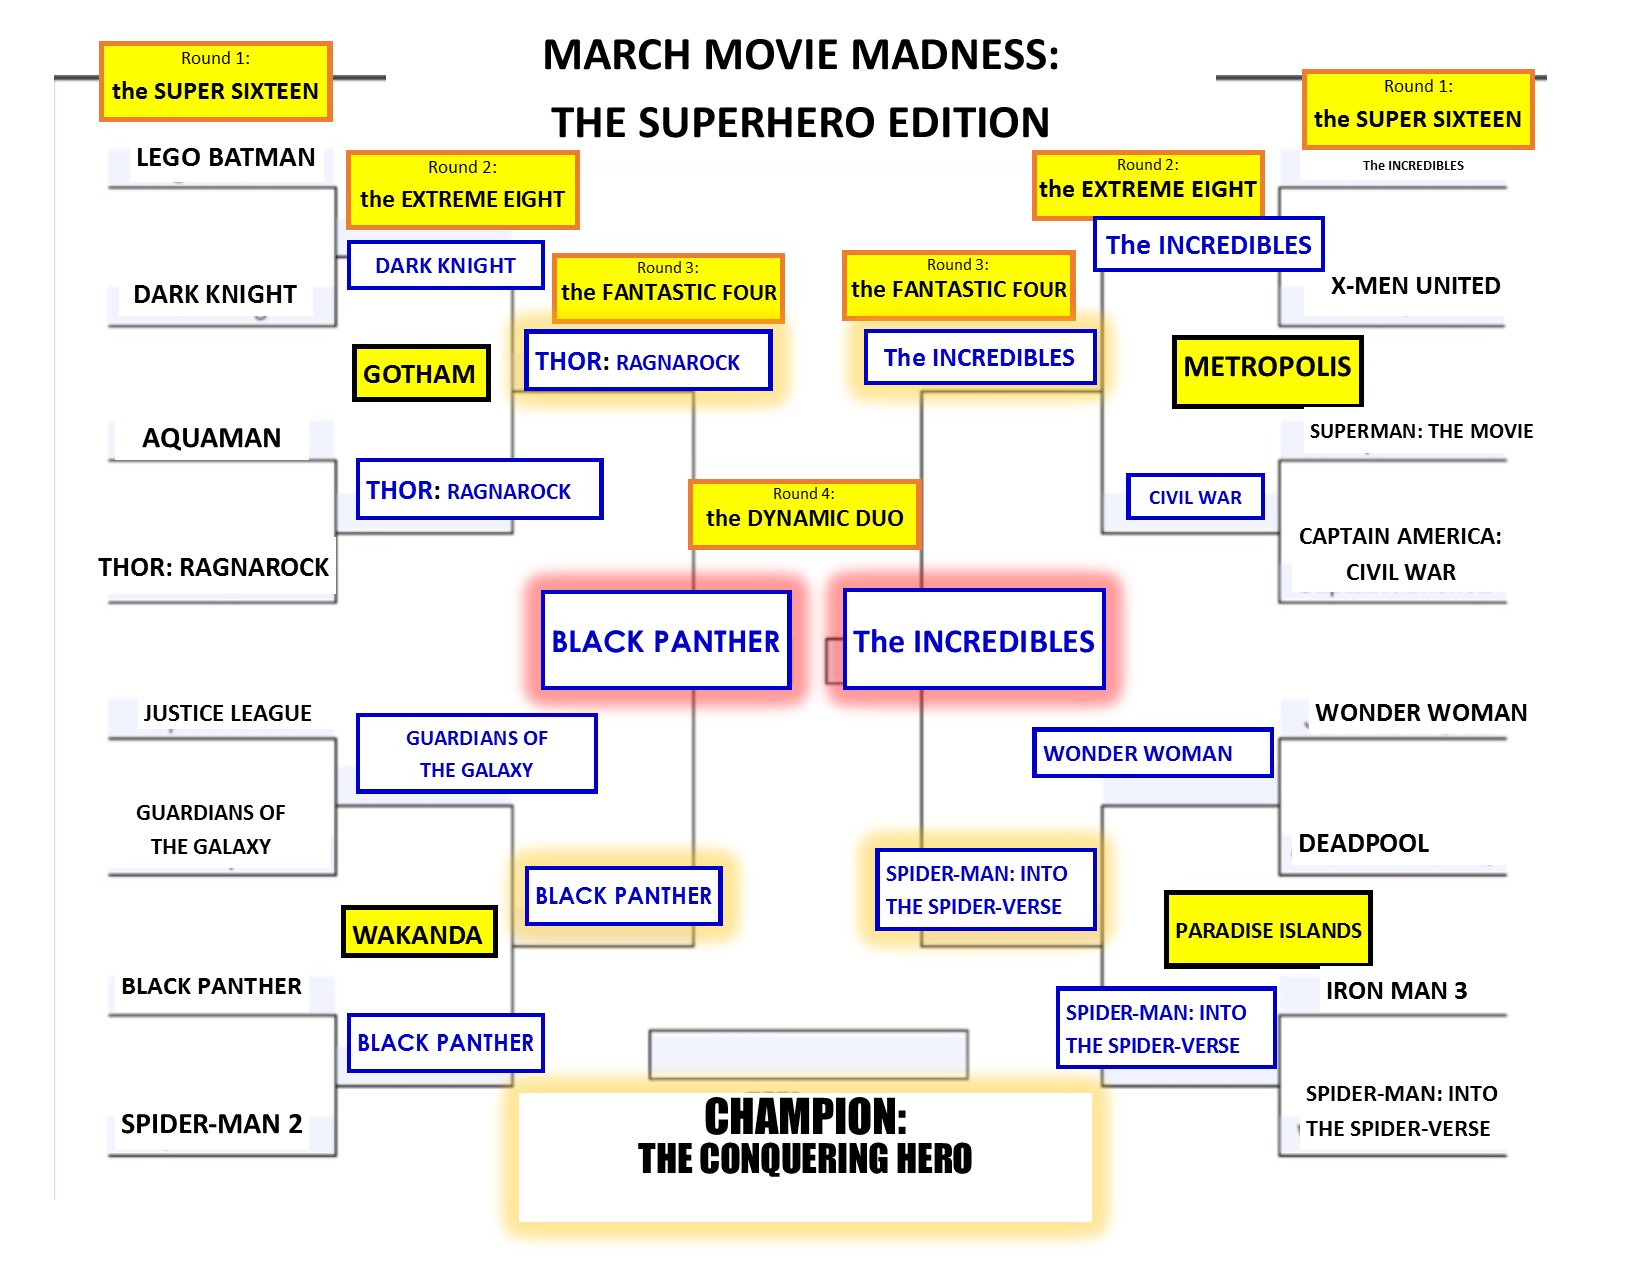 Image of brackets for Lilly Library March Movie Madness showing results of Black Panther vs The Incredibles